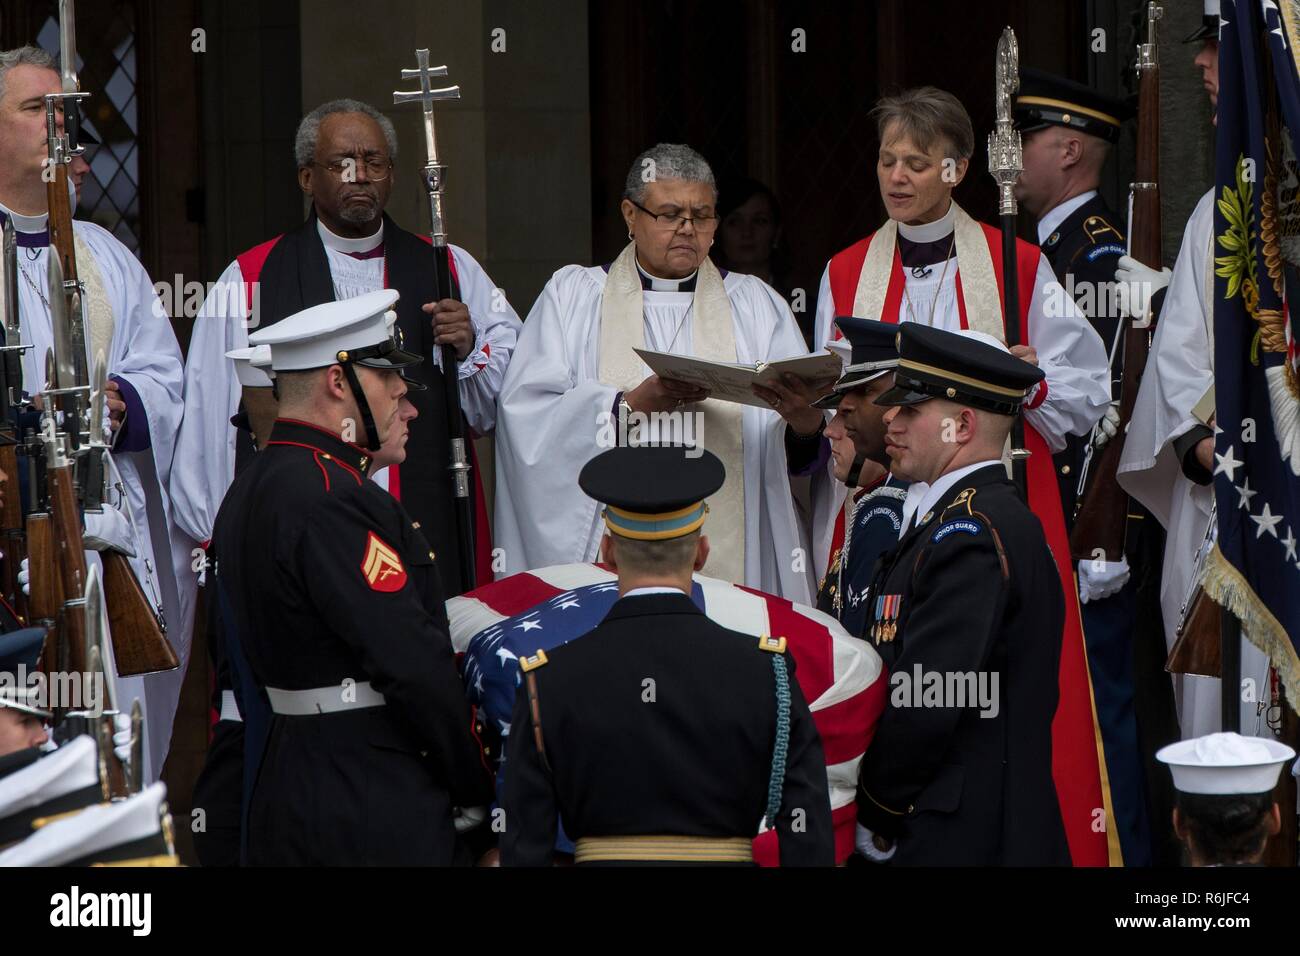 Presiding Bishop Michael Curry, left, Rev. Canon Rosemarie Logan Duncan, center, and Bishop Mariann Edgar Budde receive the flag-draped casket of former president George H.W. Bush as it arrives for the State Funeral at at the National Cathedral December 5, 2018 in Washington, DC. Bush, the 41st President, died in his Houston home at age 94. Stock Photo